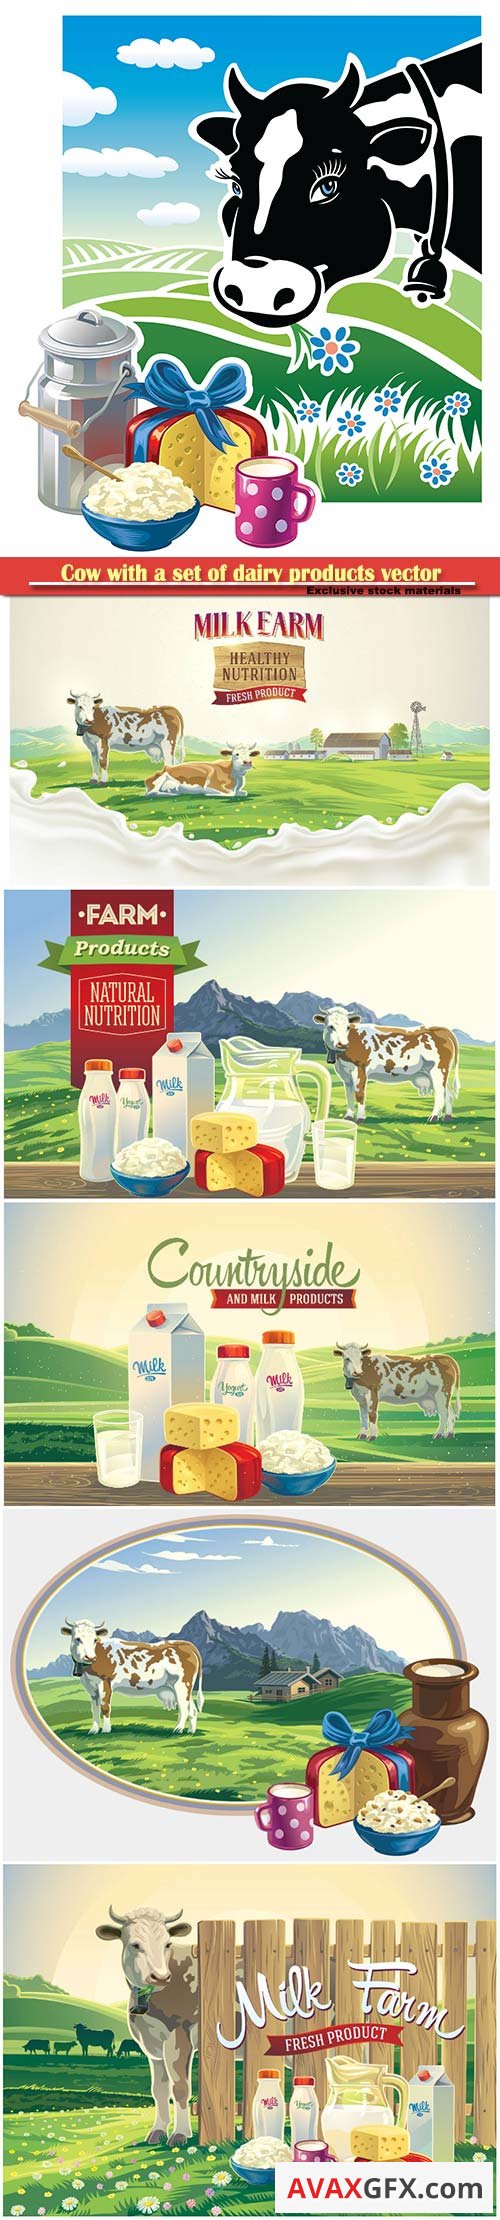 Cow with a set of dairy products vector illustration